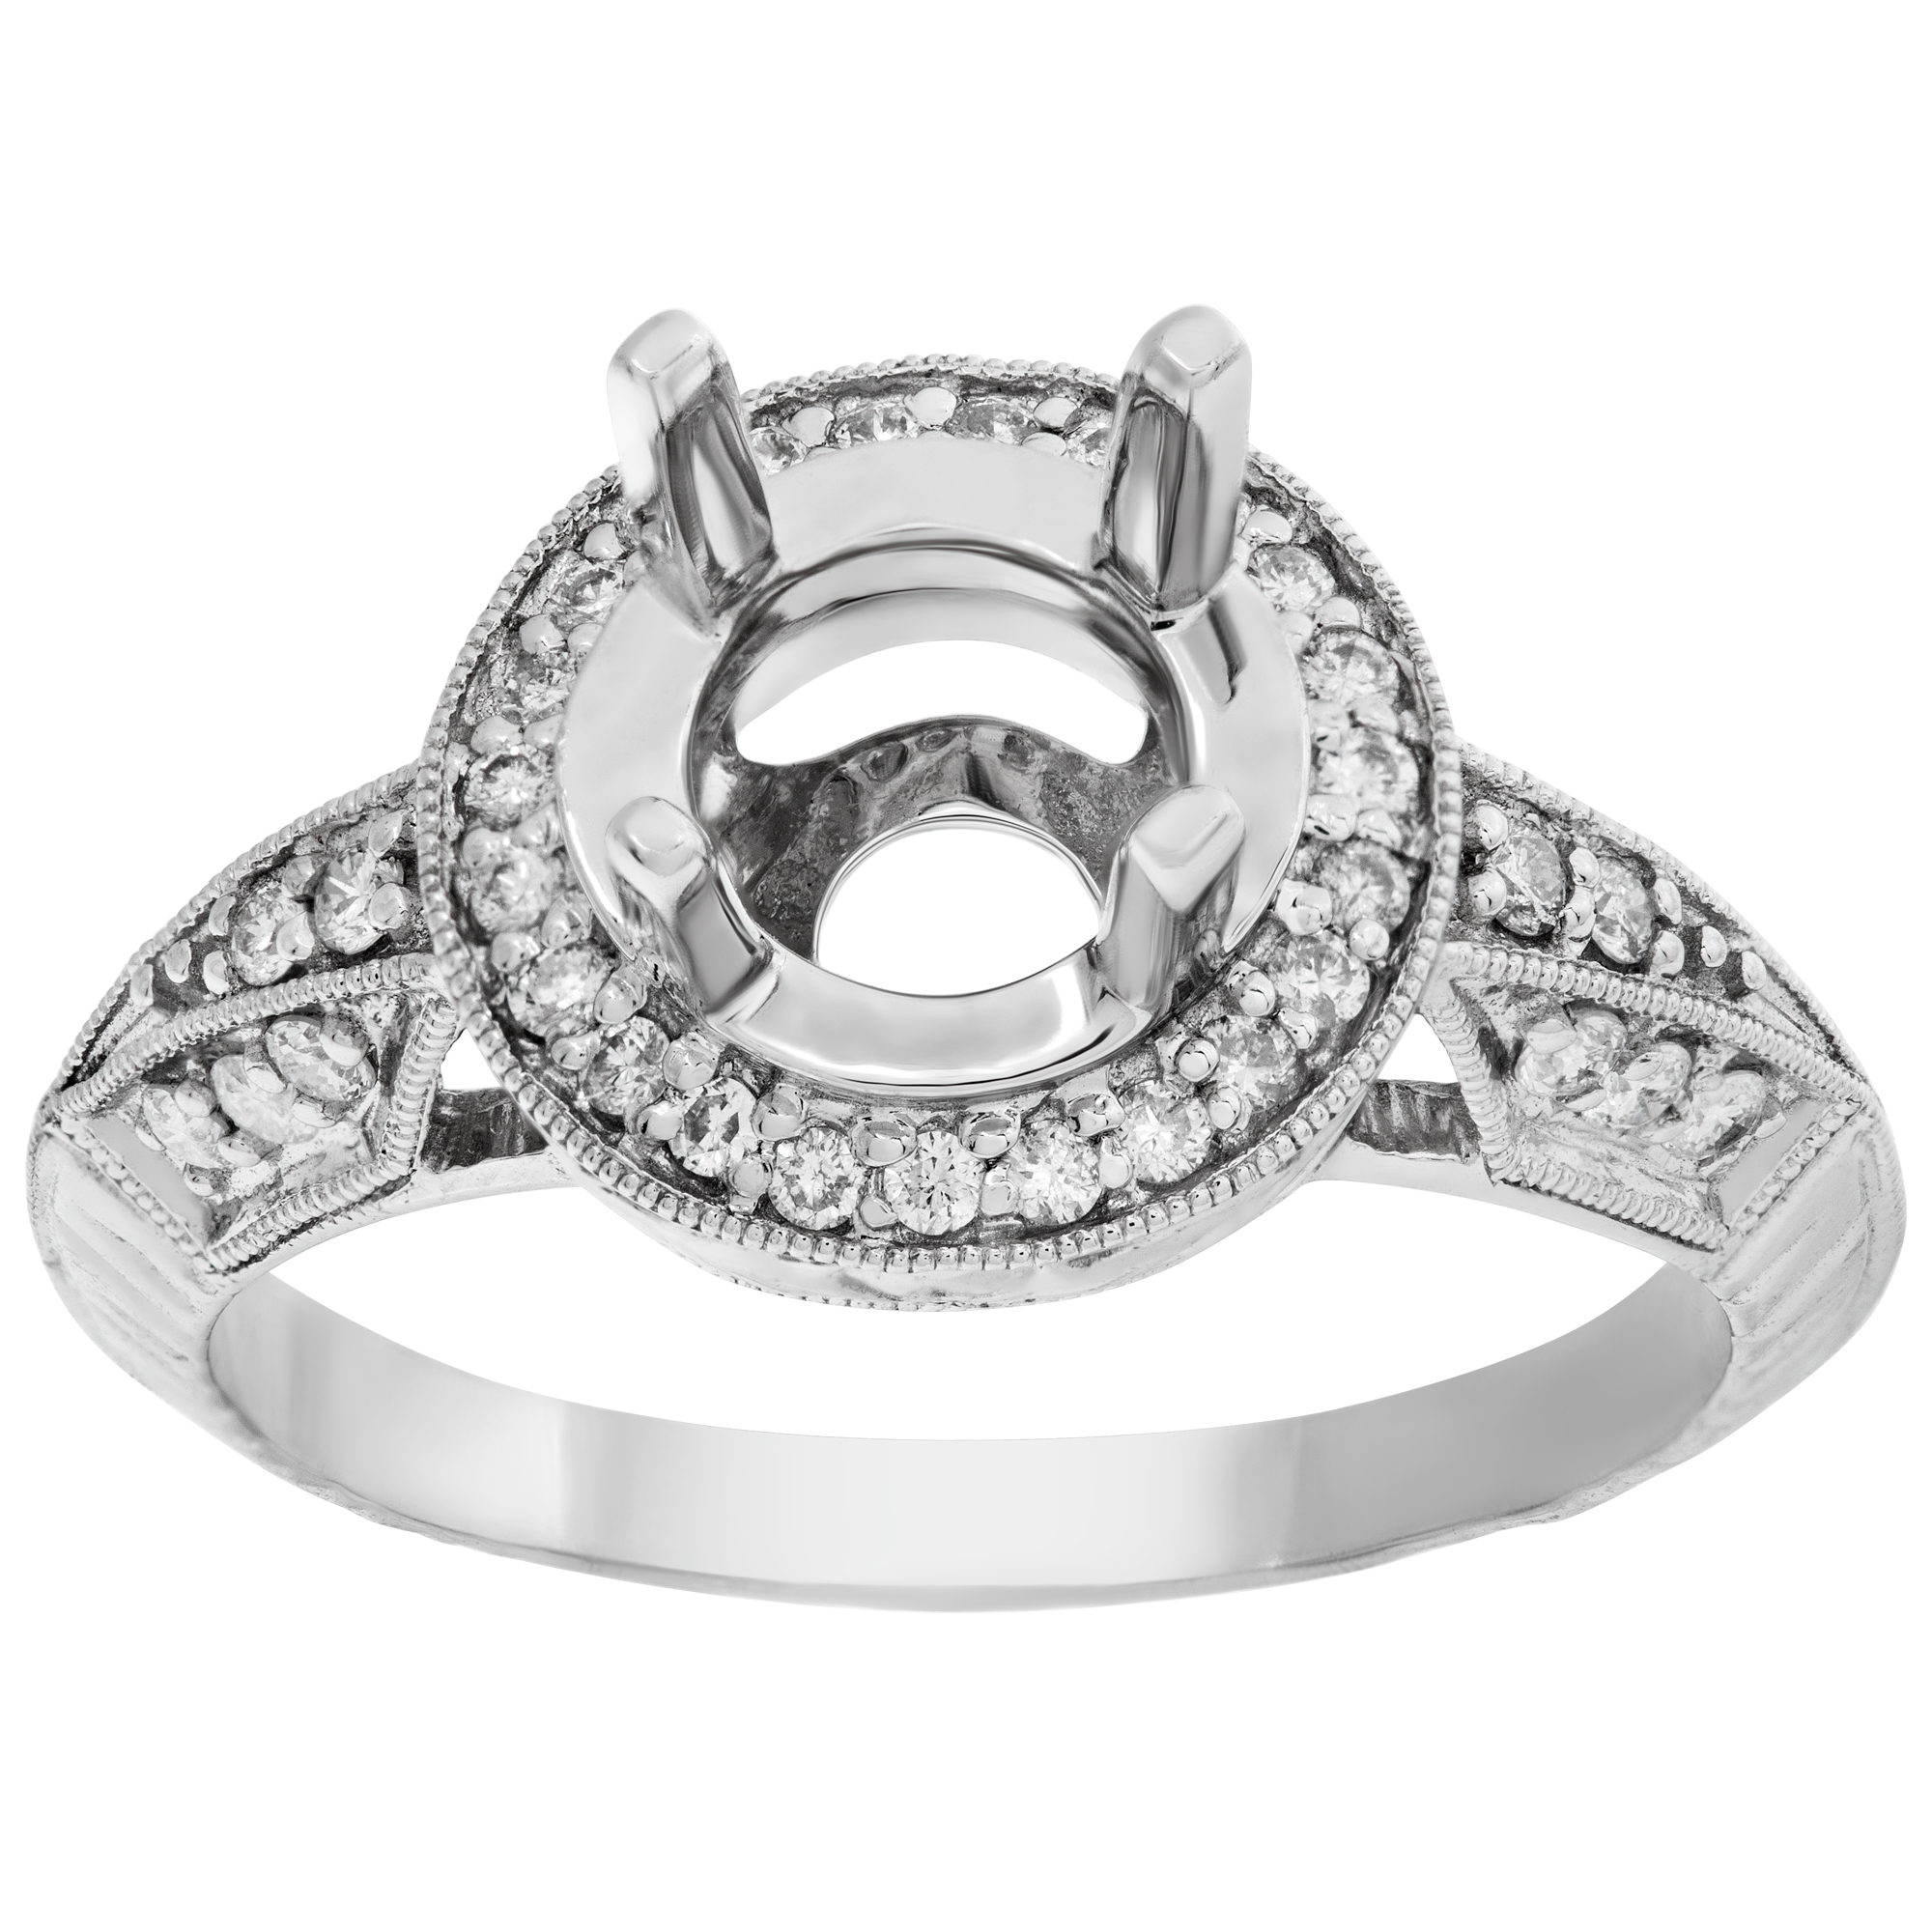 18k white gold round diamond pave setting; 1.09 cts in diamonds (H,SI1) image 1